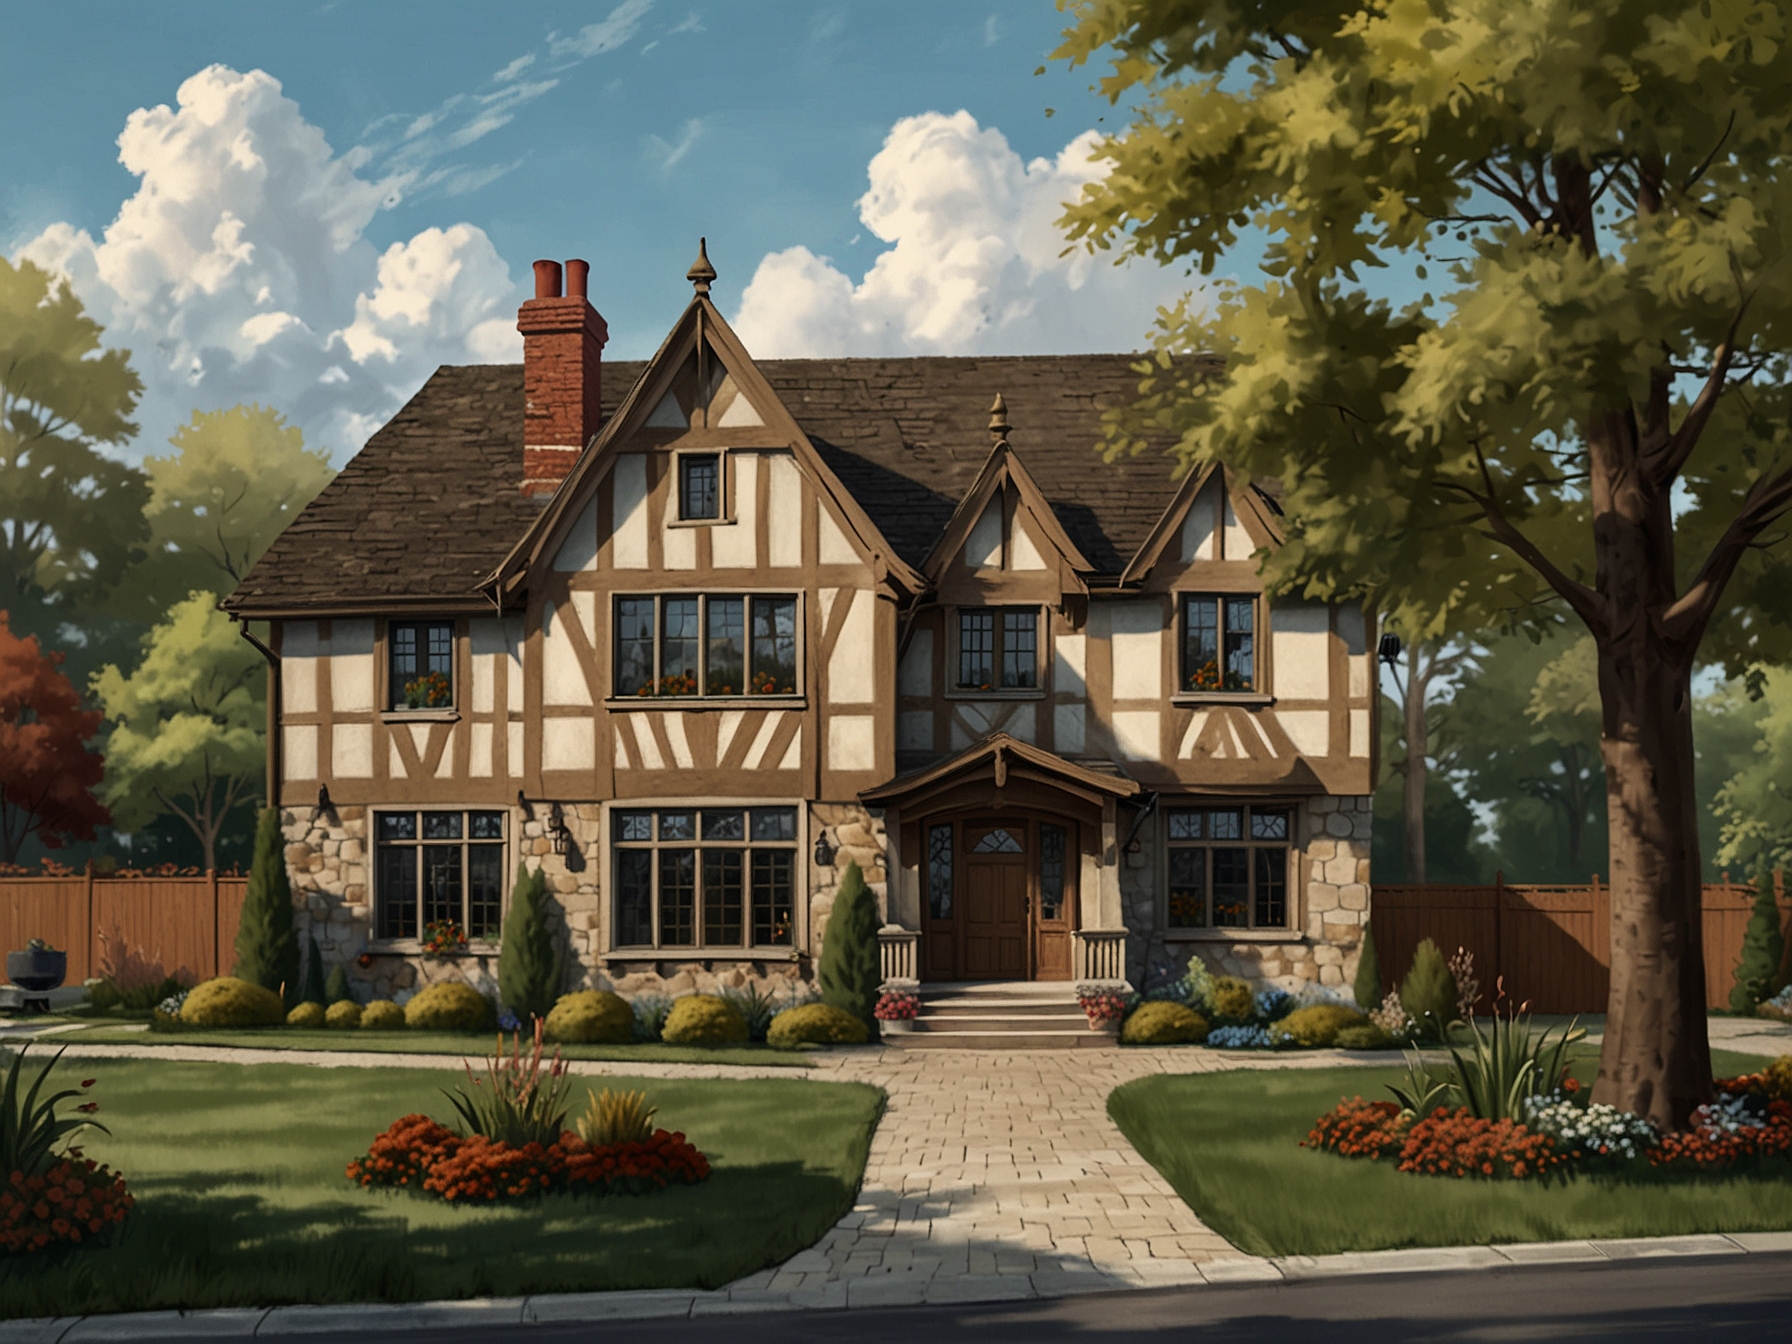 The exquisite exterior of the Tudor-style home features steep gable roofs, ornate masonry, and lush landscaping, showcasing a perfect blend of historical charm and modern elegance.